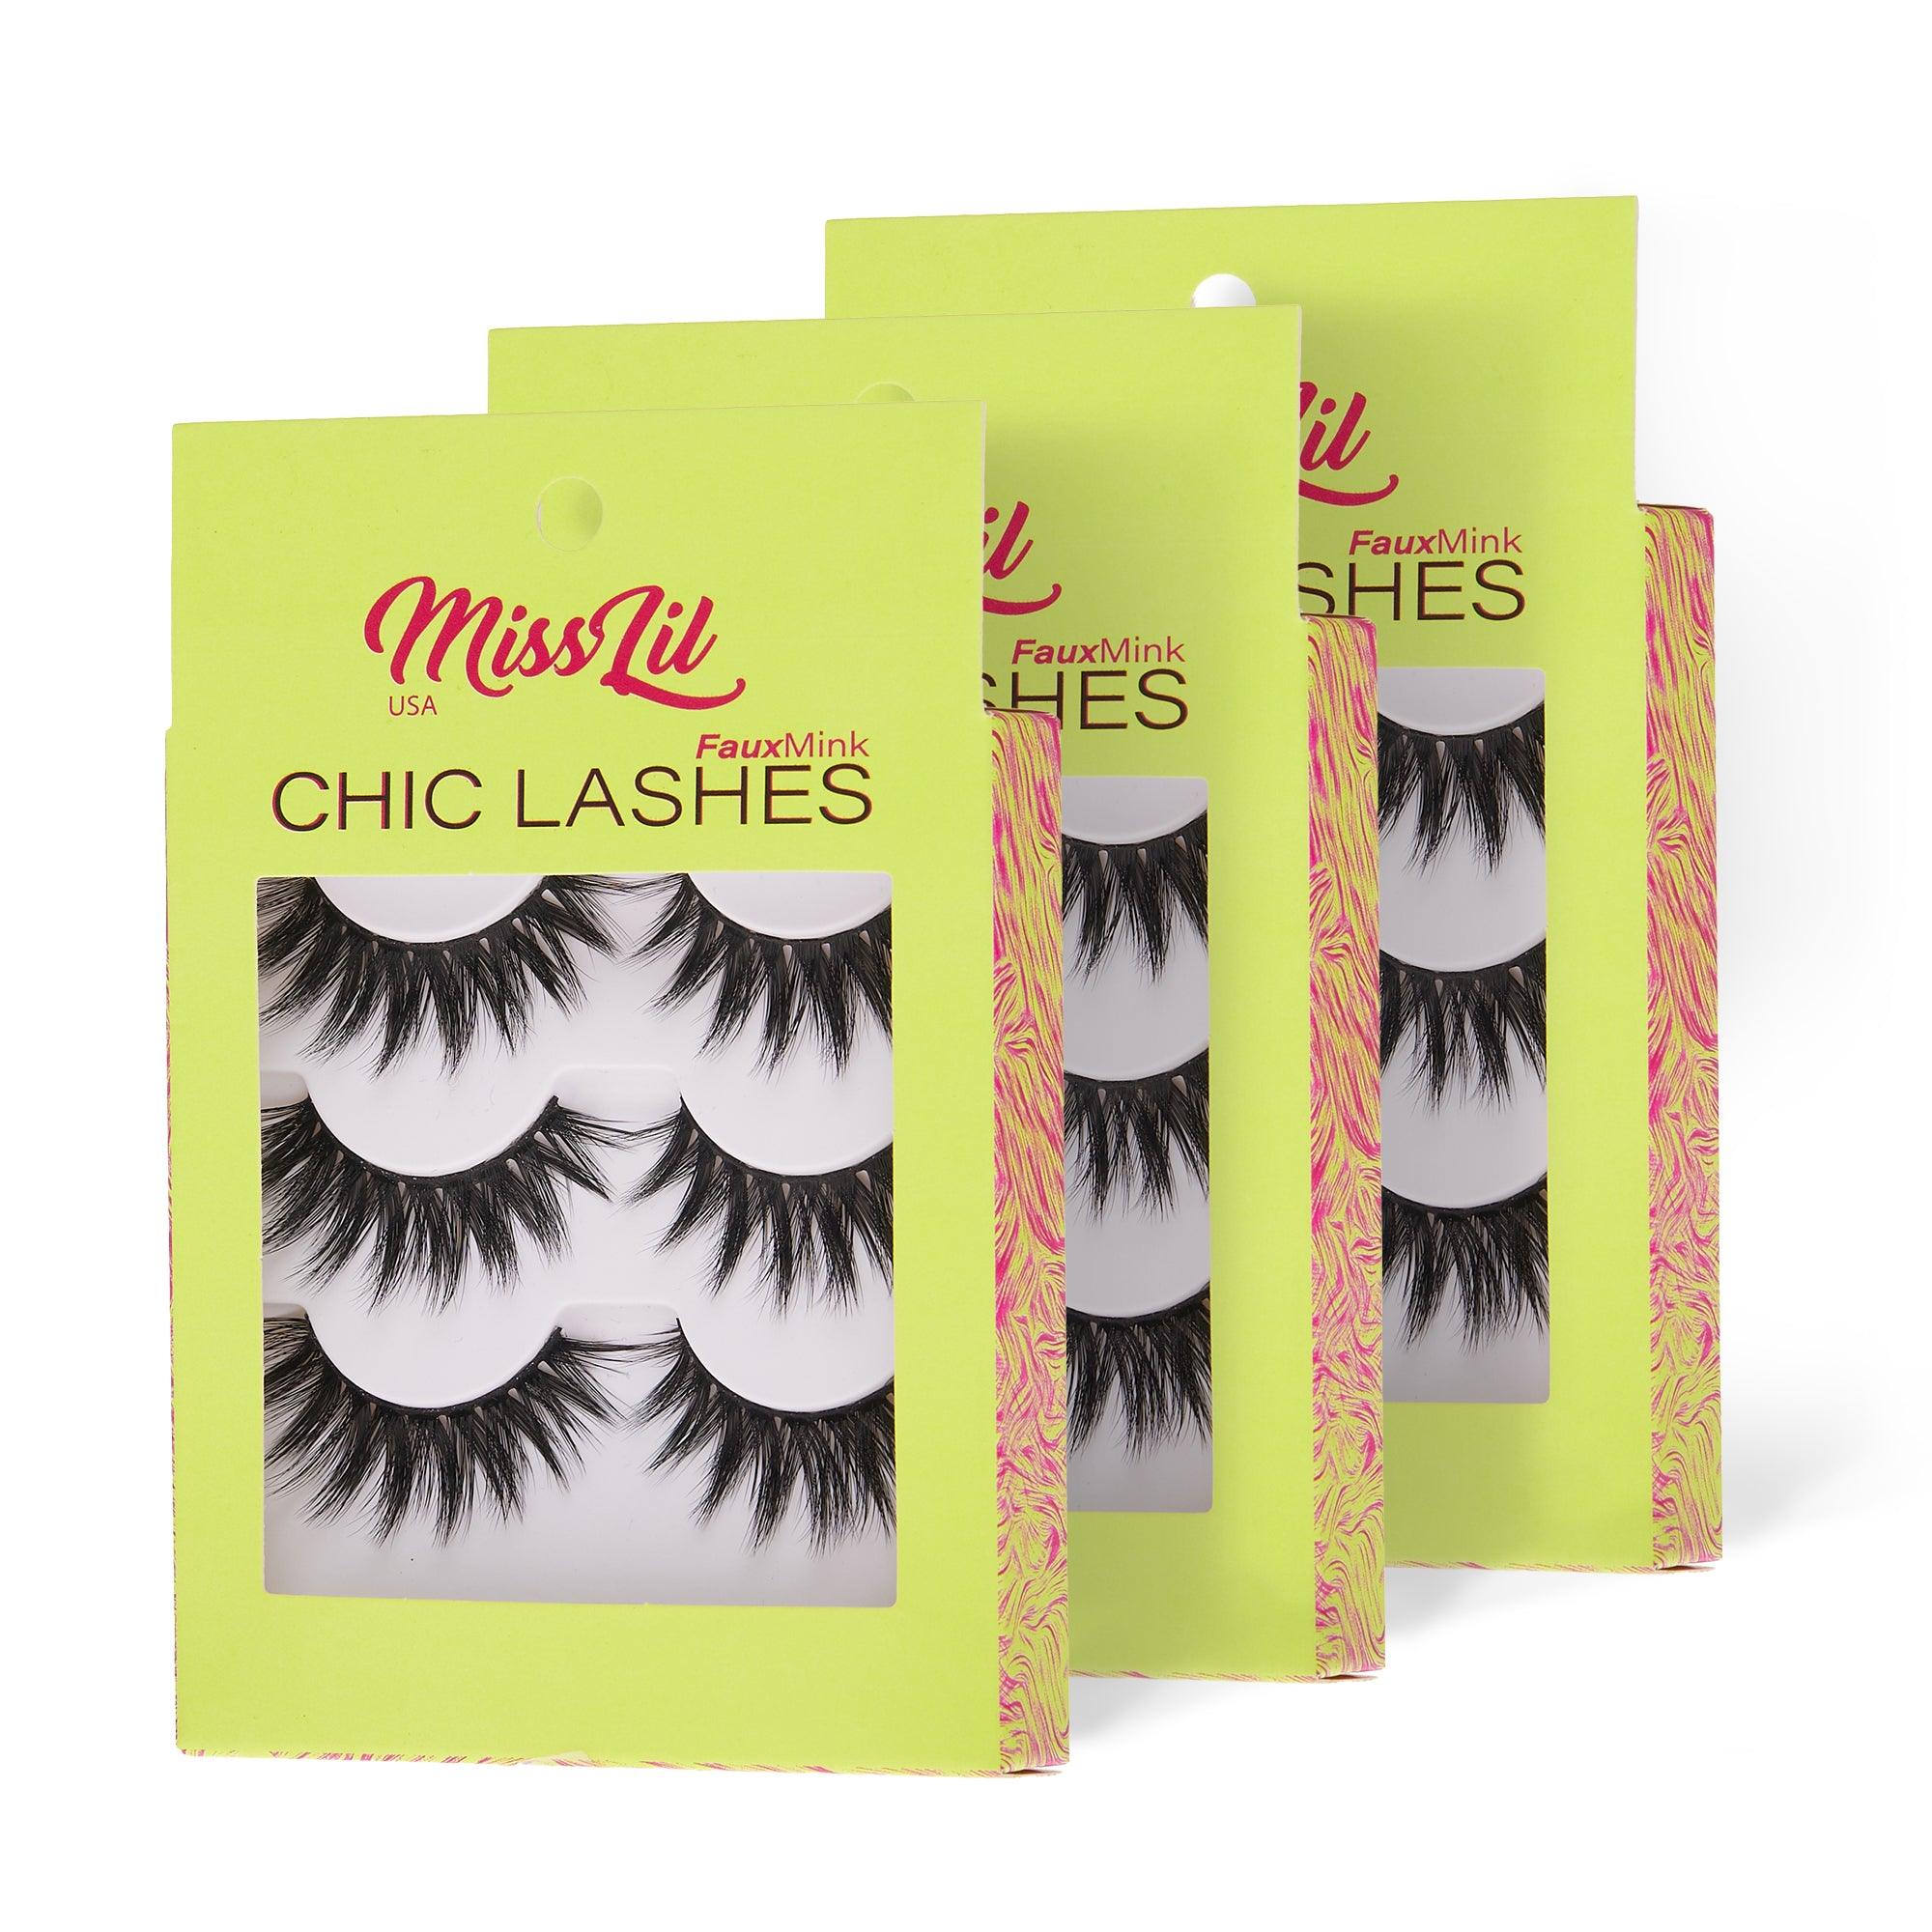 3-Pairs Lashes-Chic Lashes Collection #5 (Pack of 12) - Miss Lil USA Wholesale